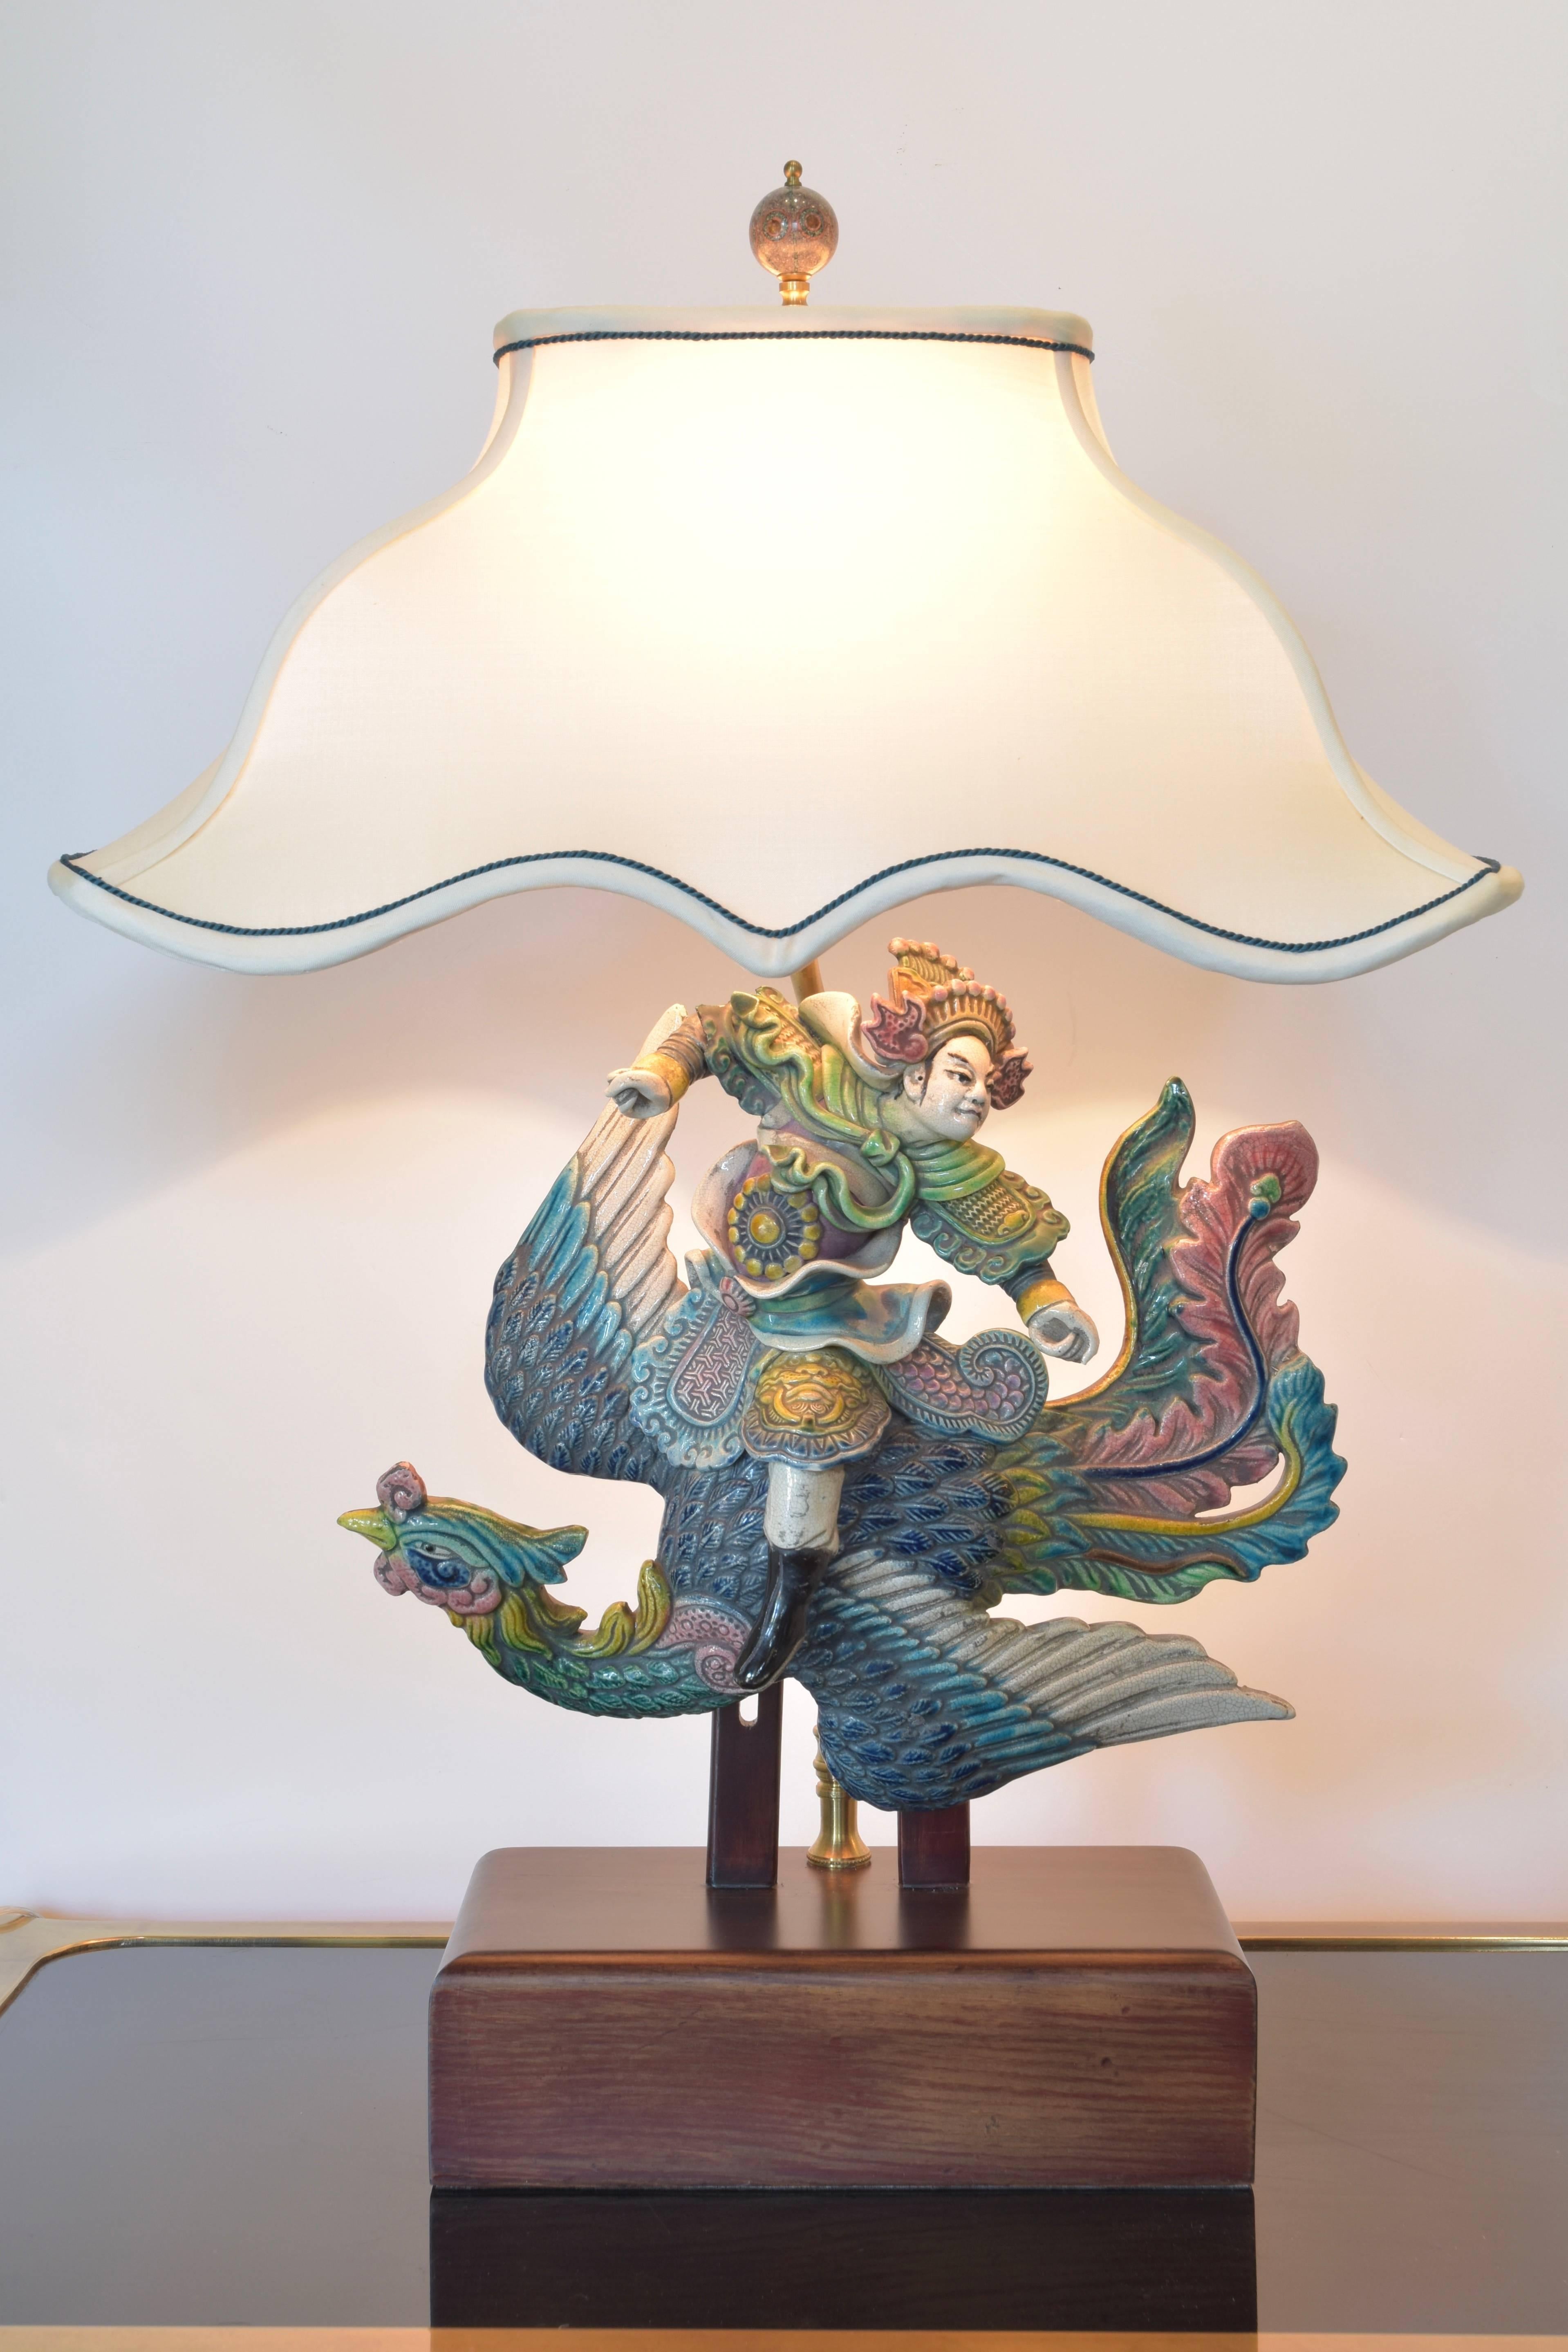 Whimsical Chinese roof tile depicting a warrior on a winged bird. A delightful piece with beautiful coloration in shades of aqua, blue, celadon, yellow and rose.  The custom silk shade perfectly follows the lines of the figure in flight.